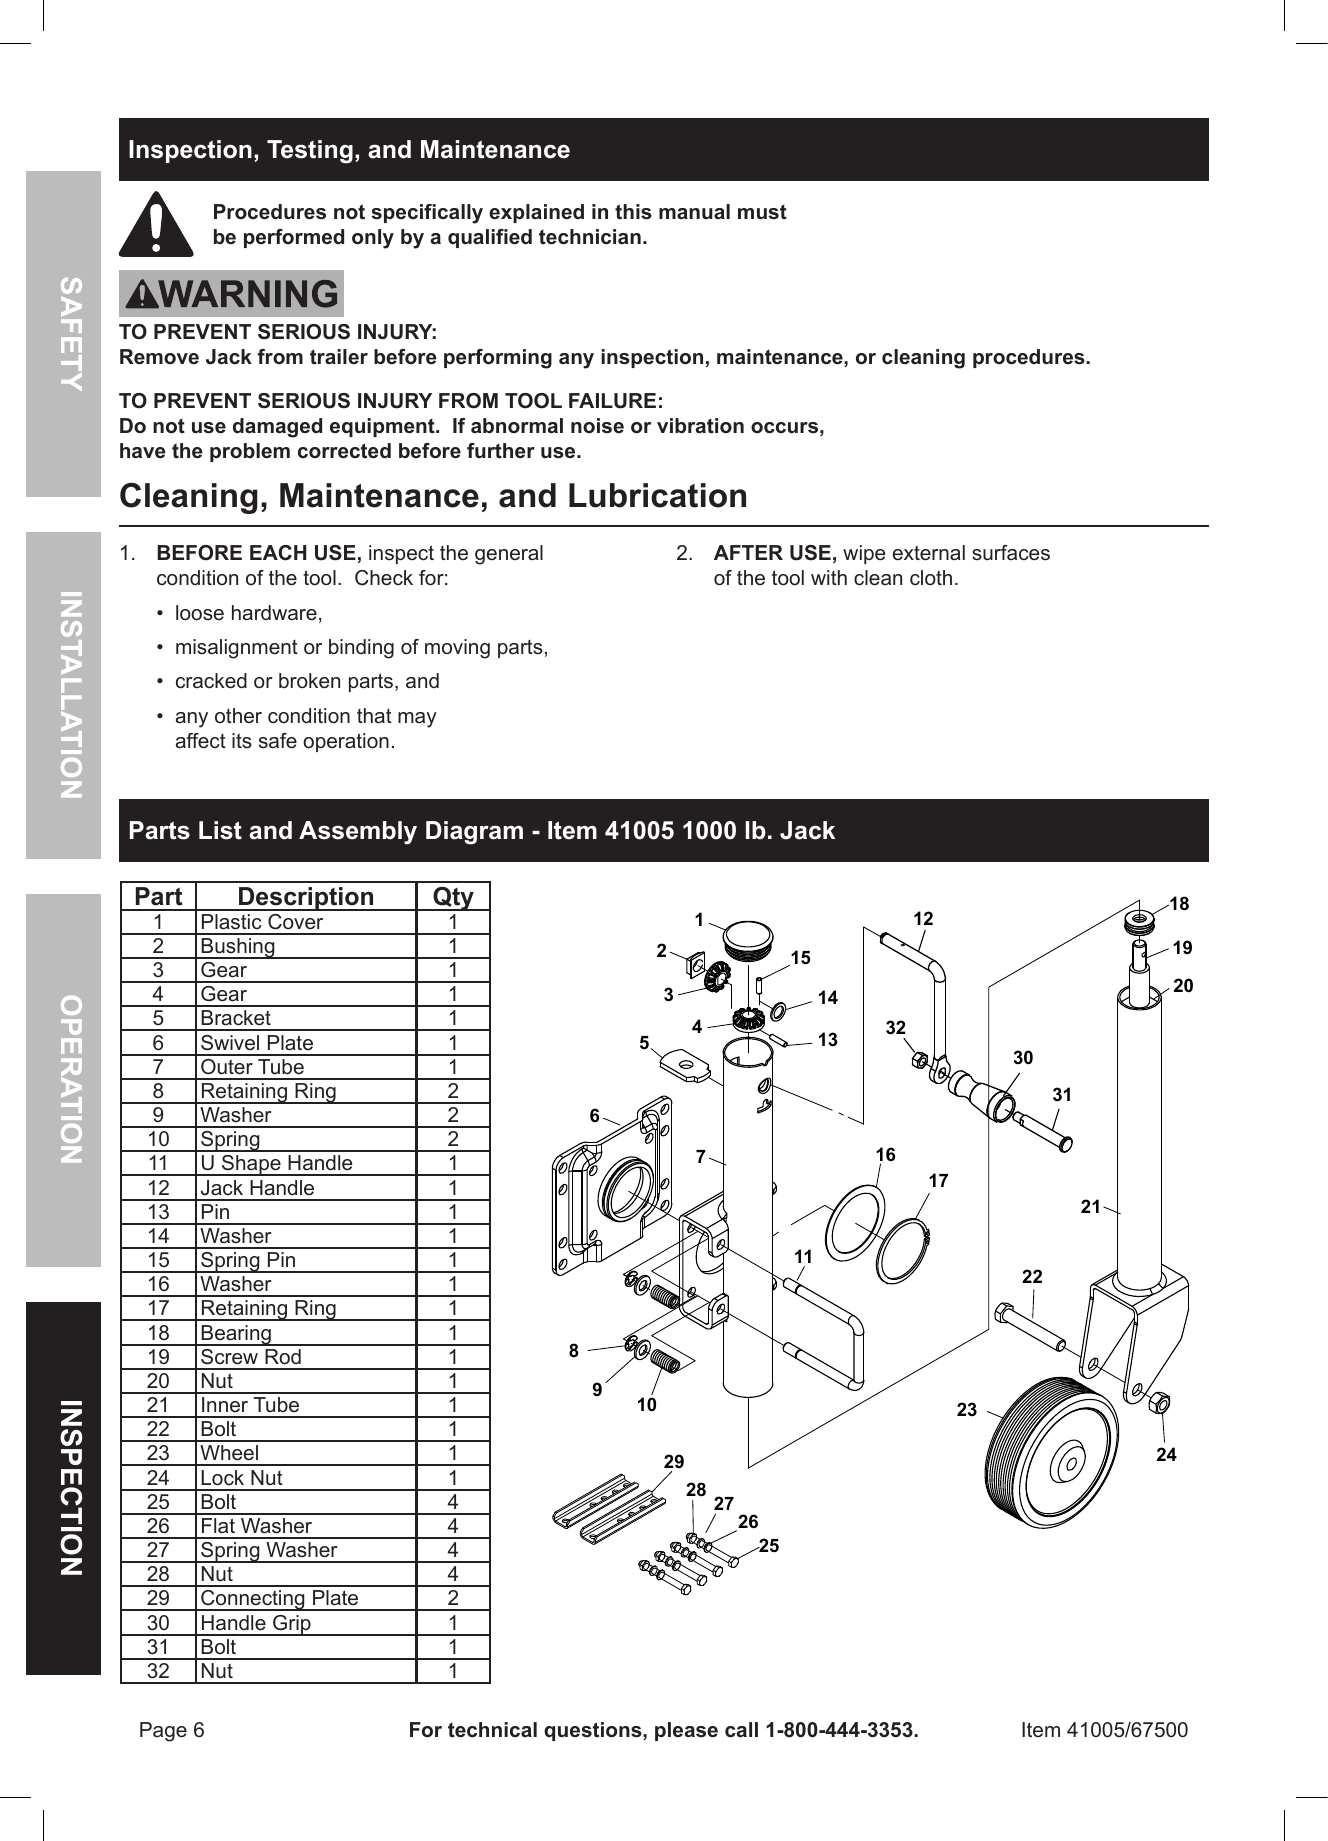 Page 6 of 8 - Harbor-Freight Harbor-Freight-1000-Lb-Capacity-Swing-Back-Trailer-Jack-Product-Manual-  Harbor-freight-1000-lb-capacity-swing-back-trailer-jack-product-manual